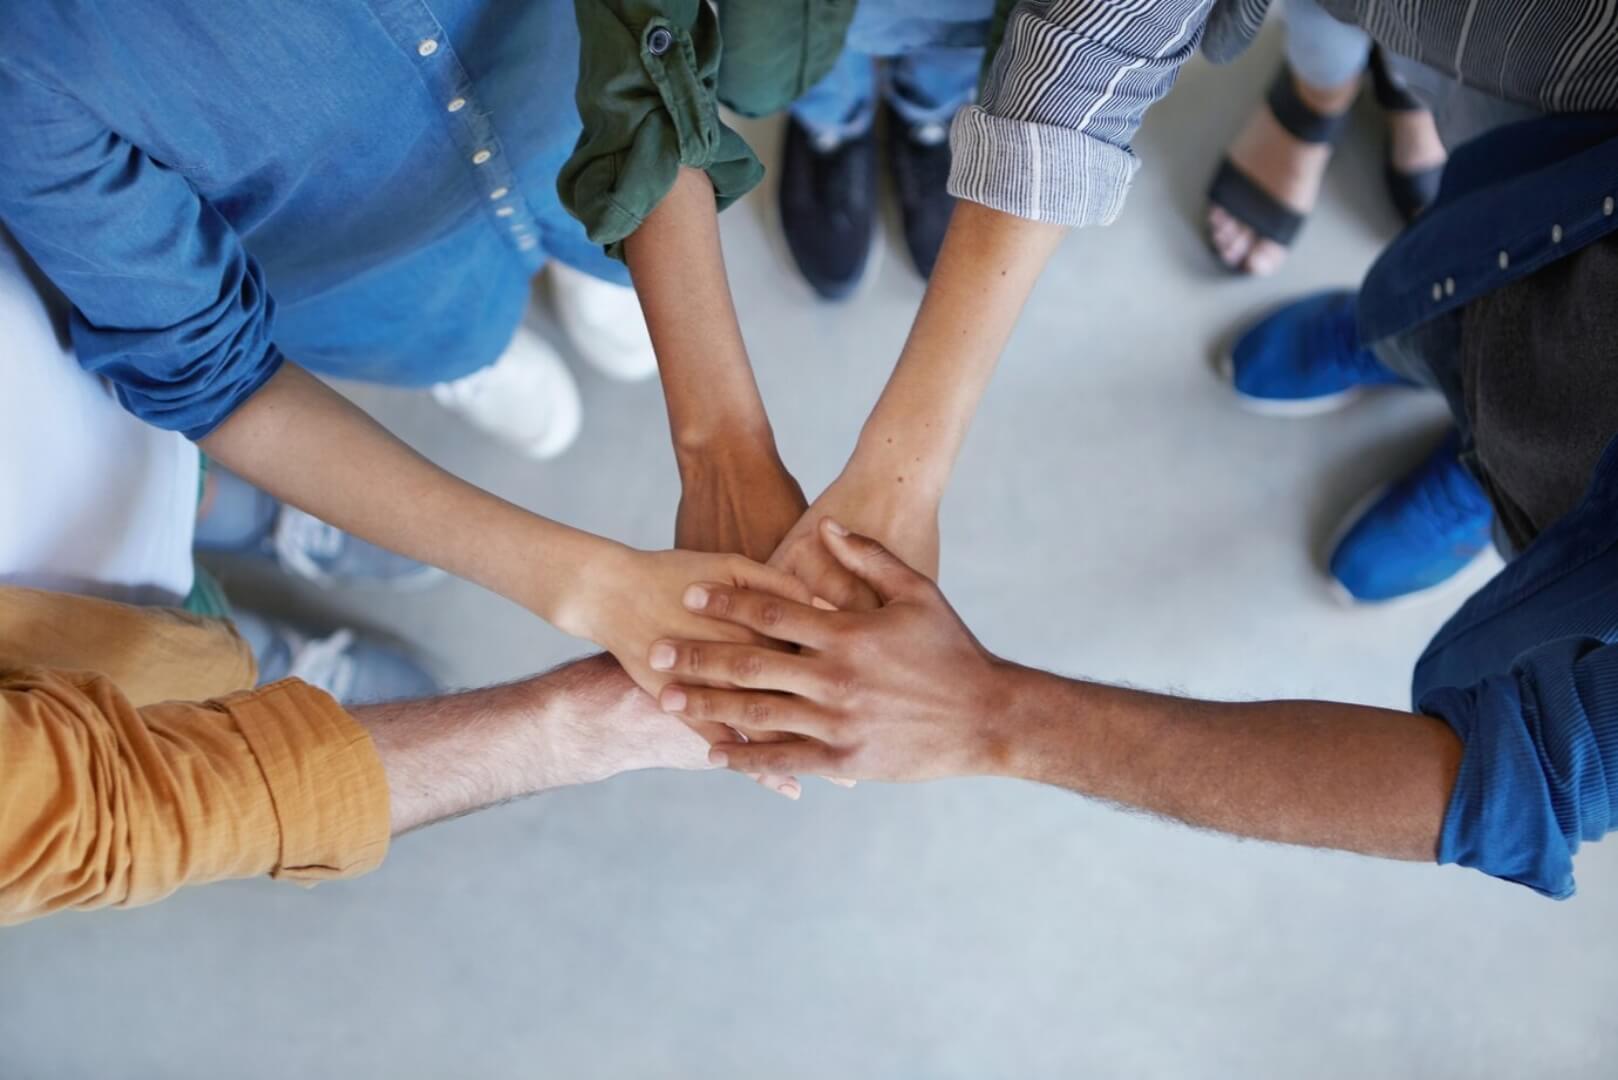 team of people putting hands together